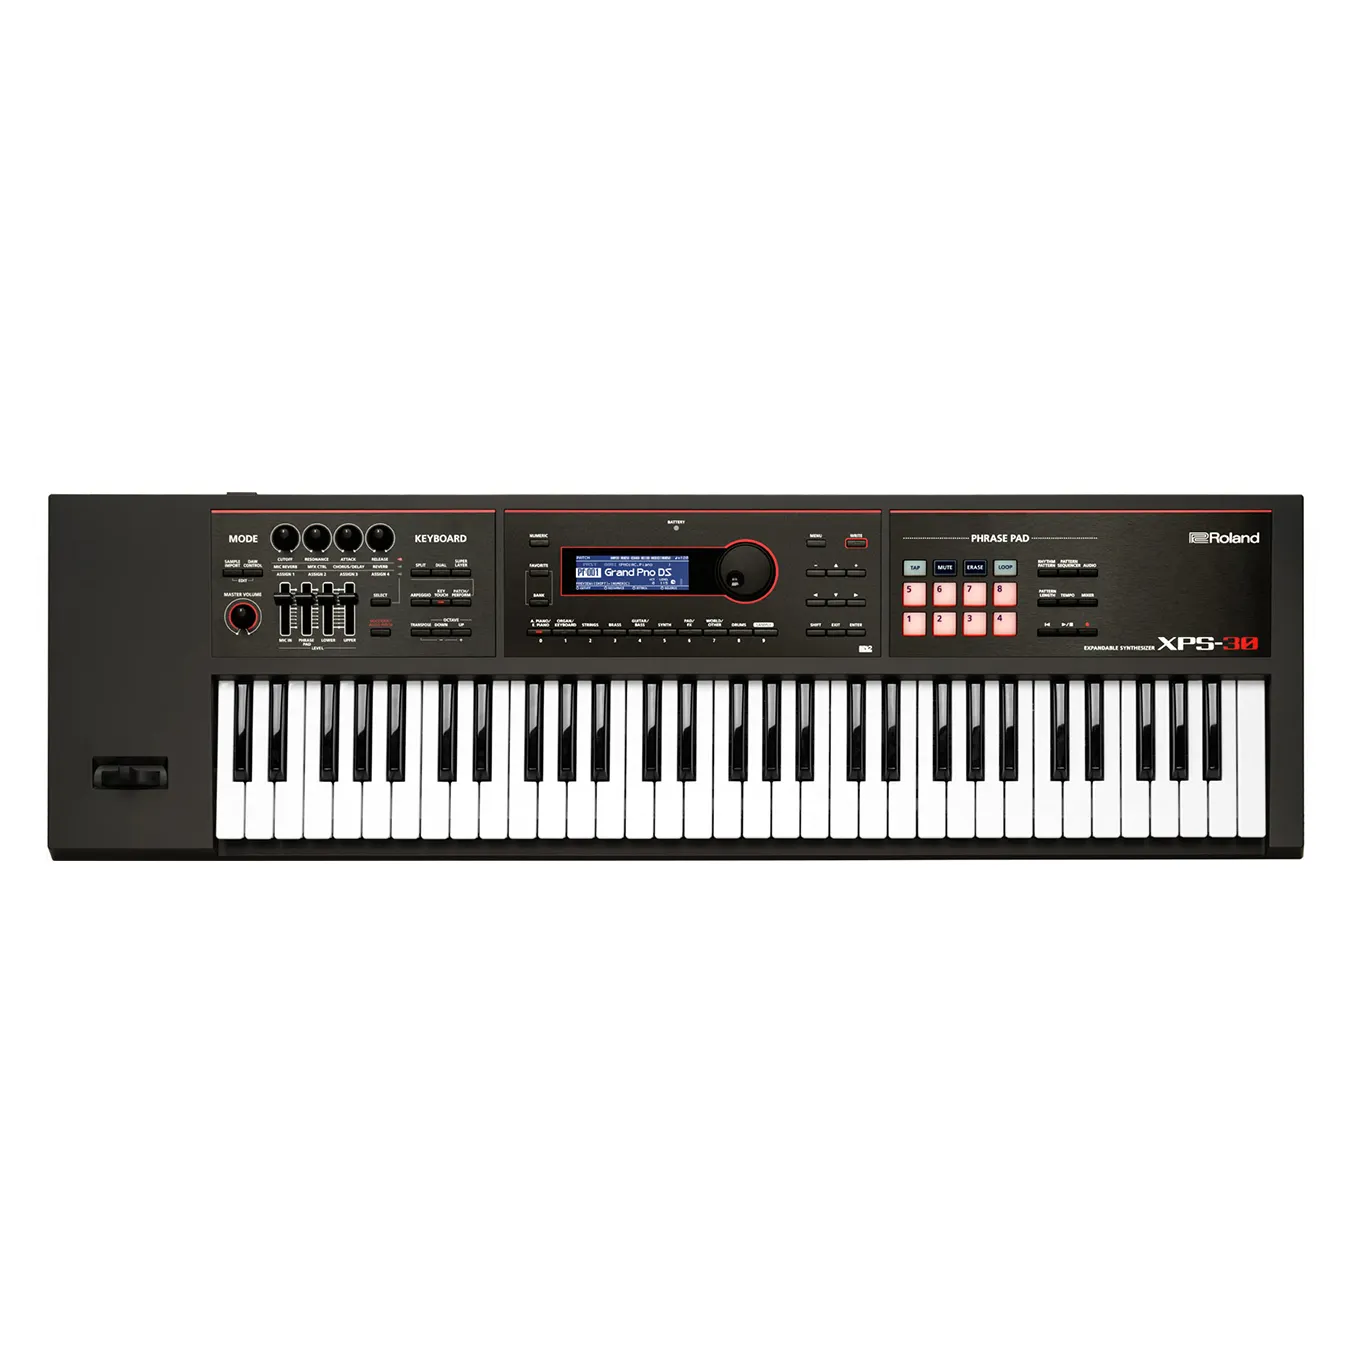 ORIGINAL NEW Rolands Xps-30 Expandable Synthesizer Keyboard Instruments